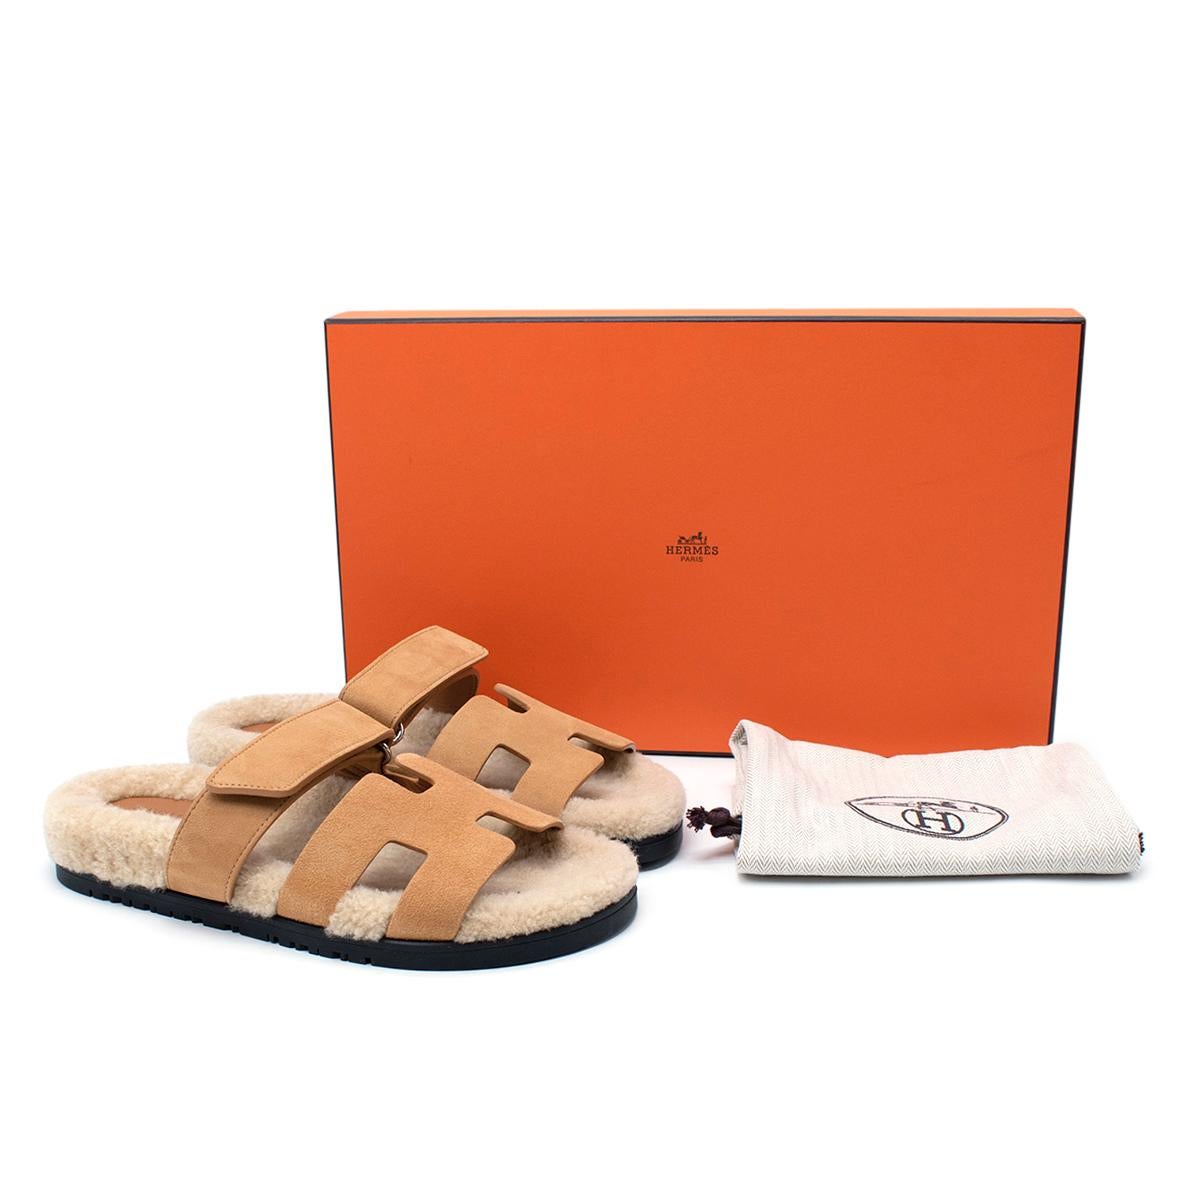 Hermes Golden Beige Shearling Chypre Sandal 

- Techno-sandal in golden beige suede goatskin with woolskin shearling lining
- Black rubber sole
- Adjustable velcro straps.
- Age Z 2021
- Original box and dust bags included 

Materials:

- Rubber